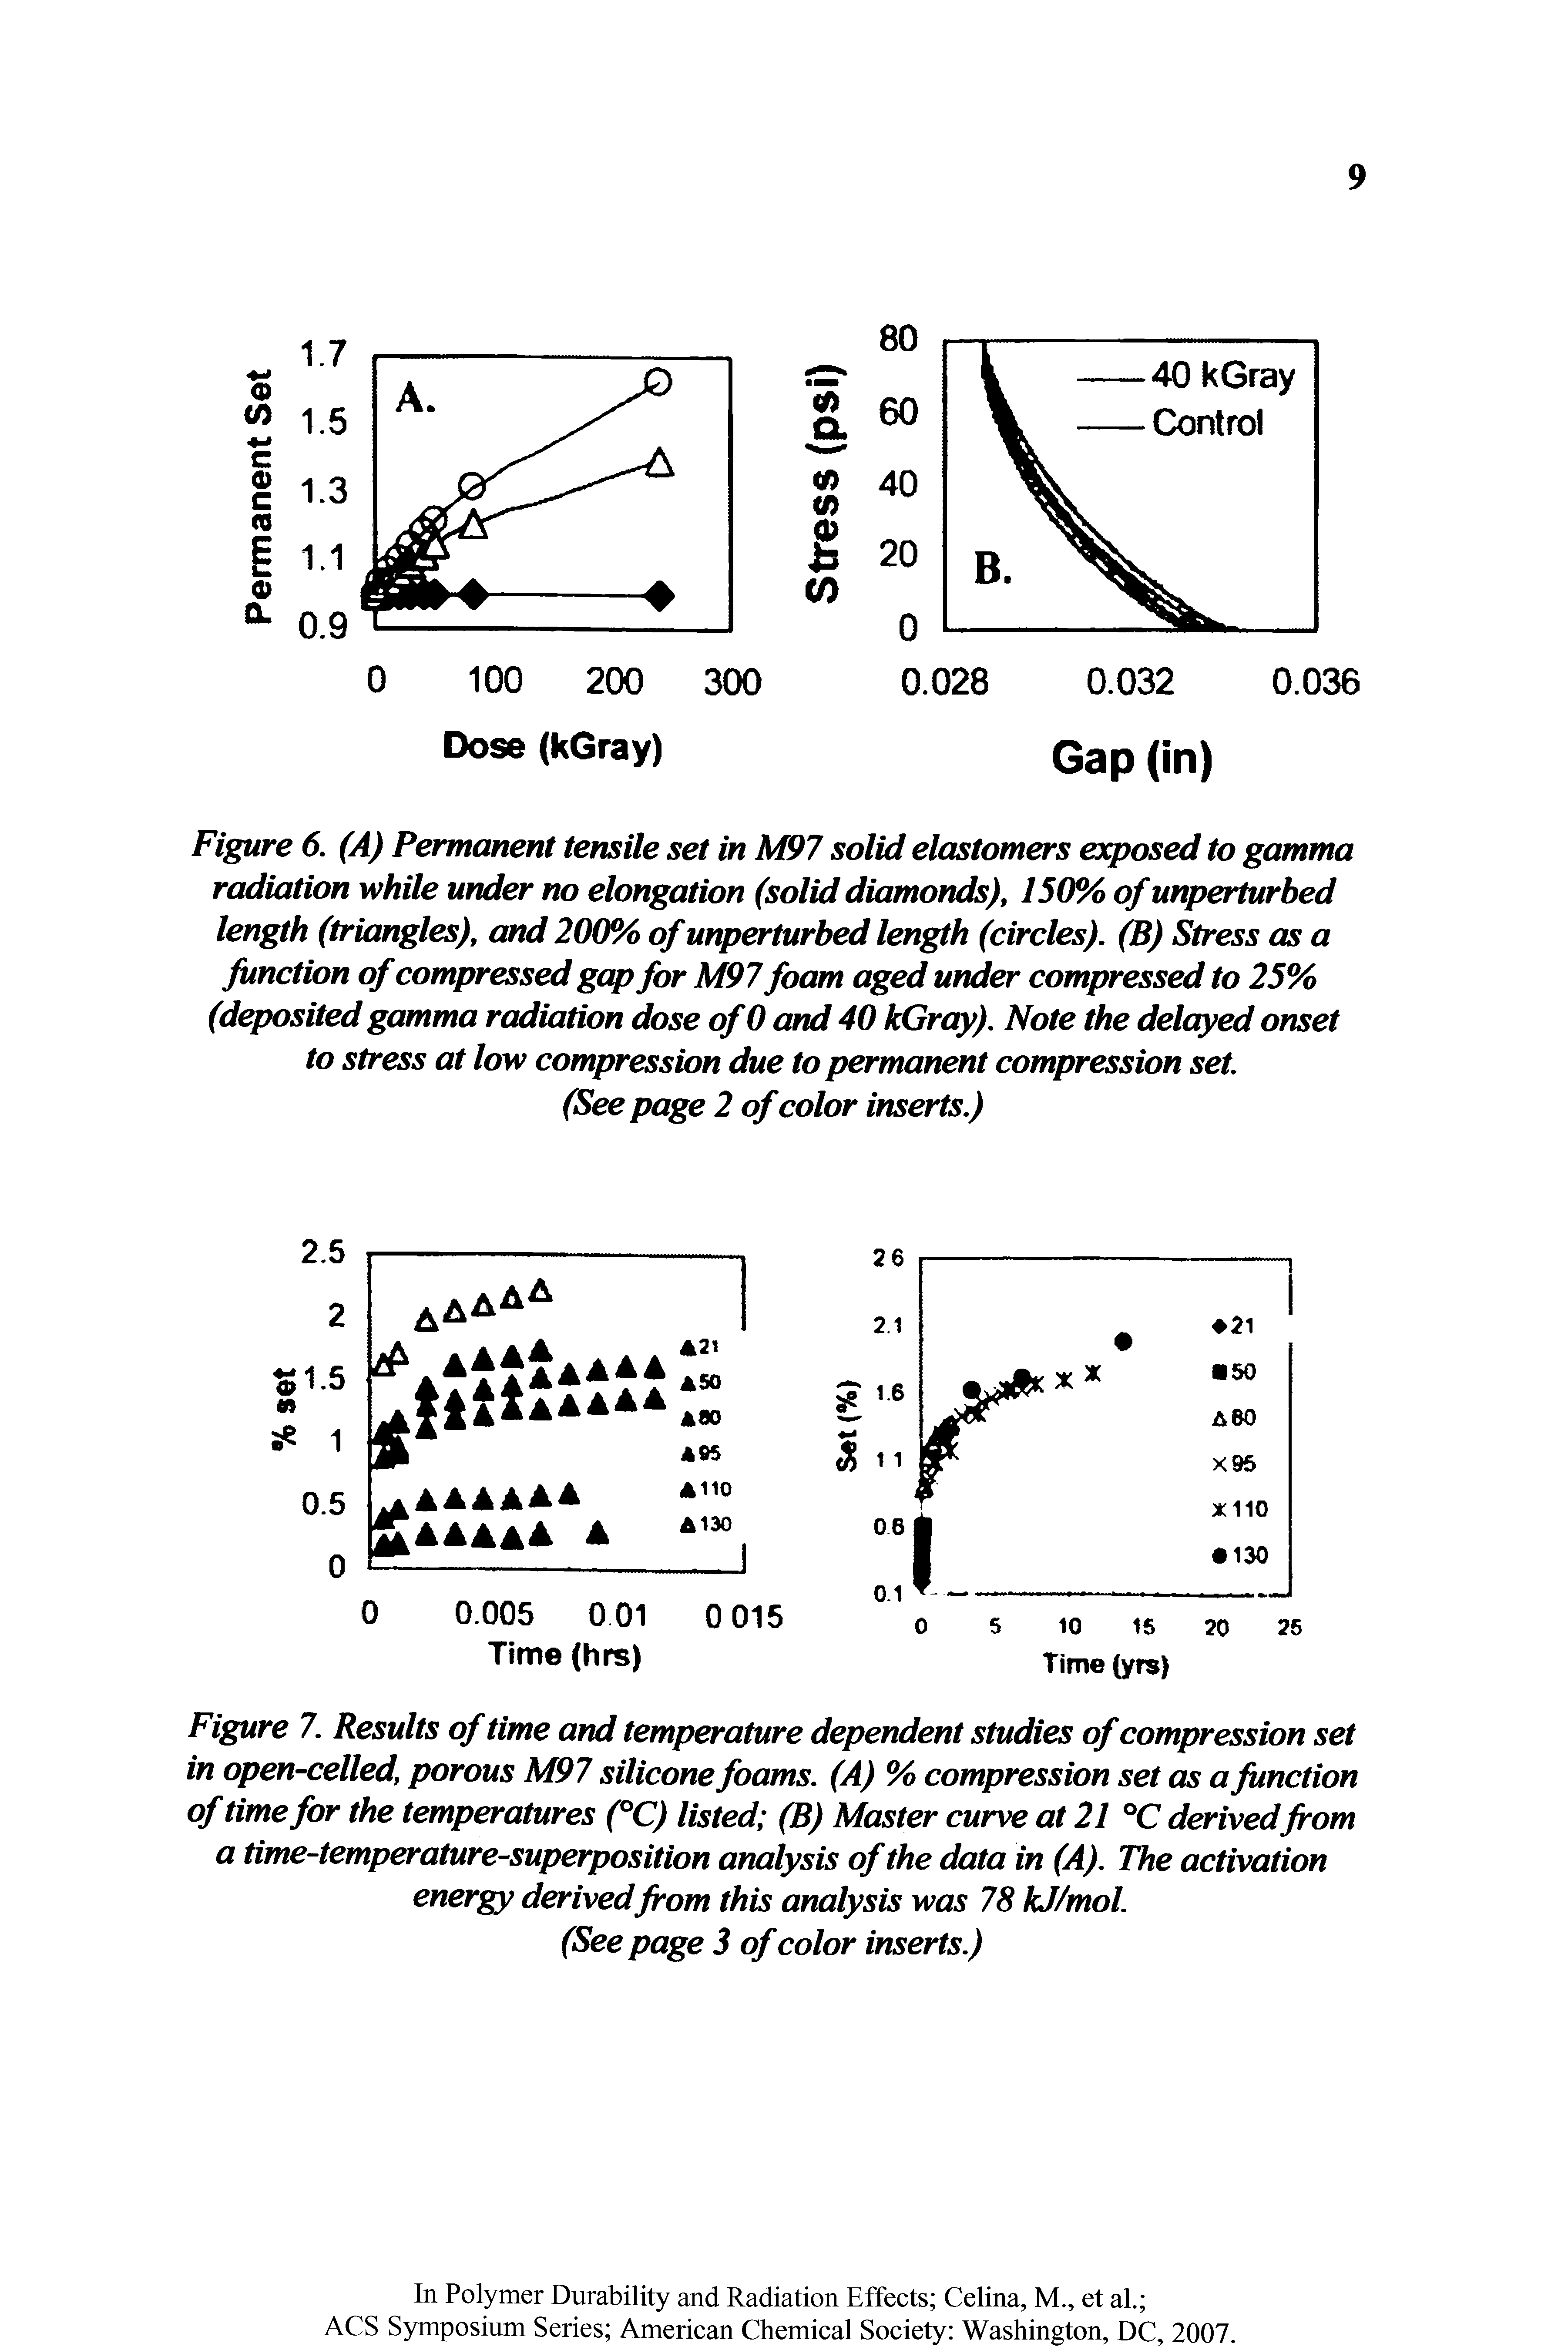 Figure 7. Results of time and temperature dependent studies of compression set in open-celled, porous M97 silicone foams. (A) % compression set as a function of time for the temperatures (°C) listed (B) Master curve at 21 °C derivedfrom a time-temperature-superposition analysis of the data in (A). The activation energy derived from this analysis was 78 kJ/mol.